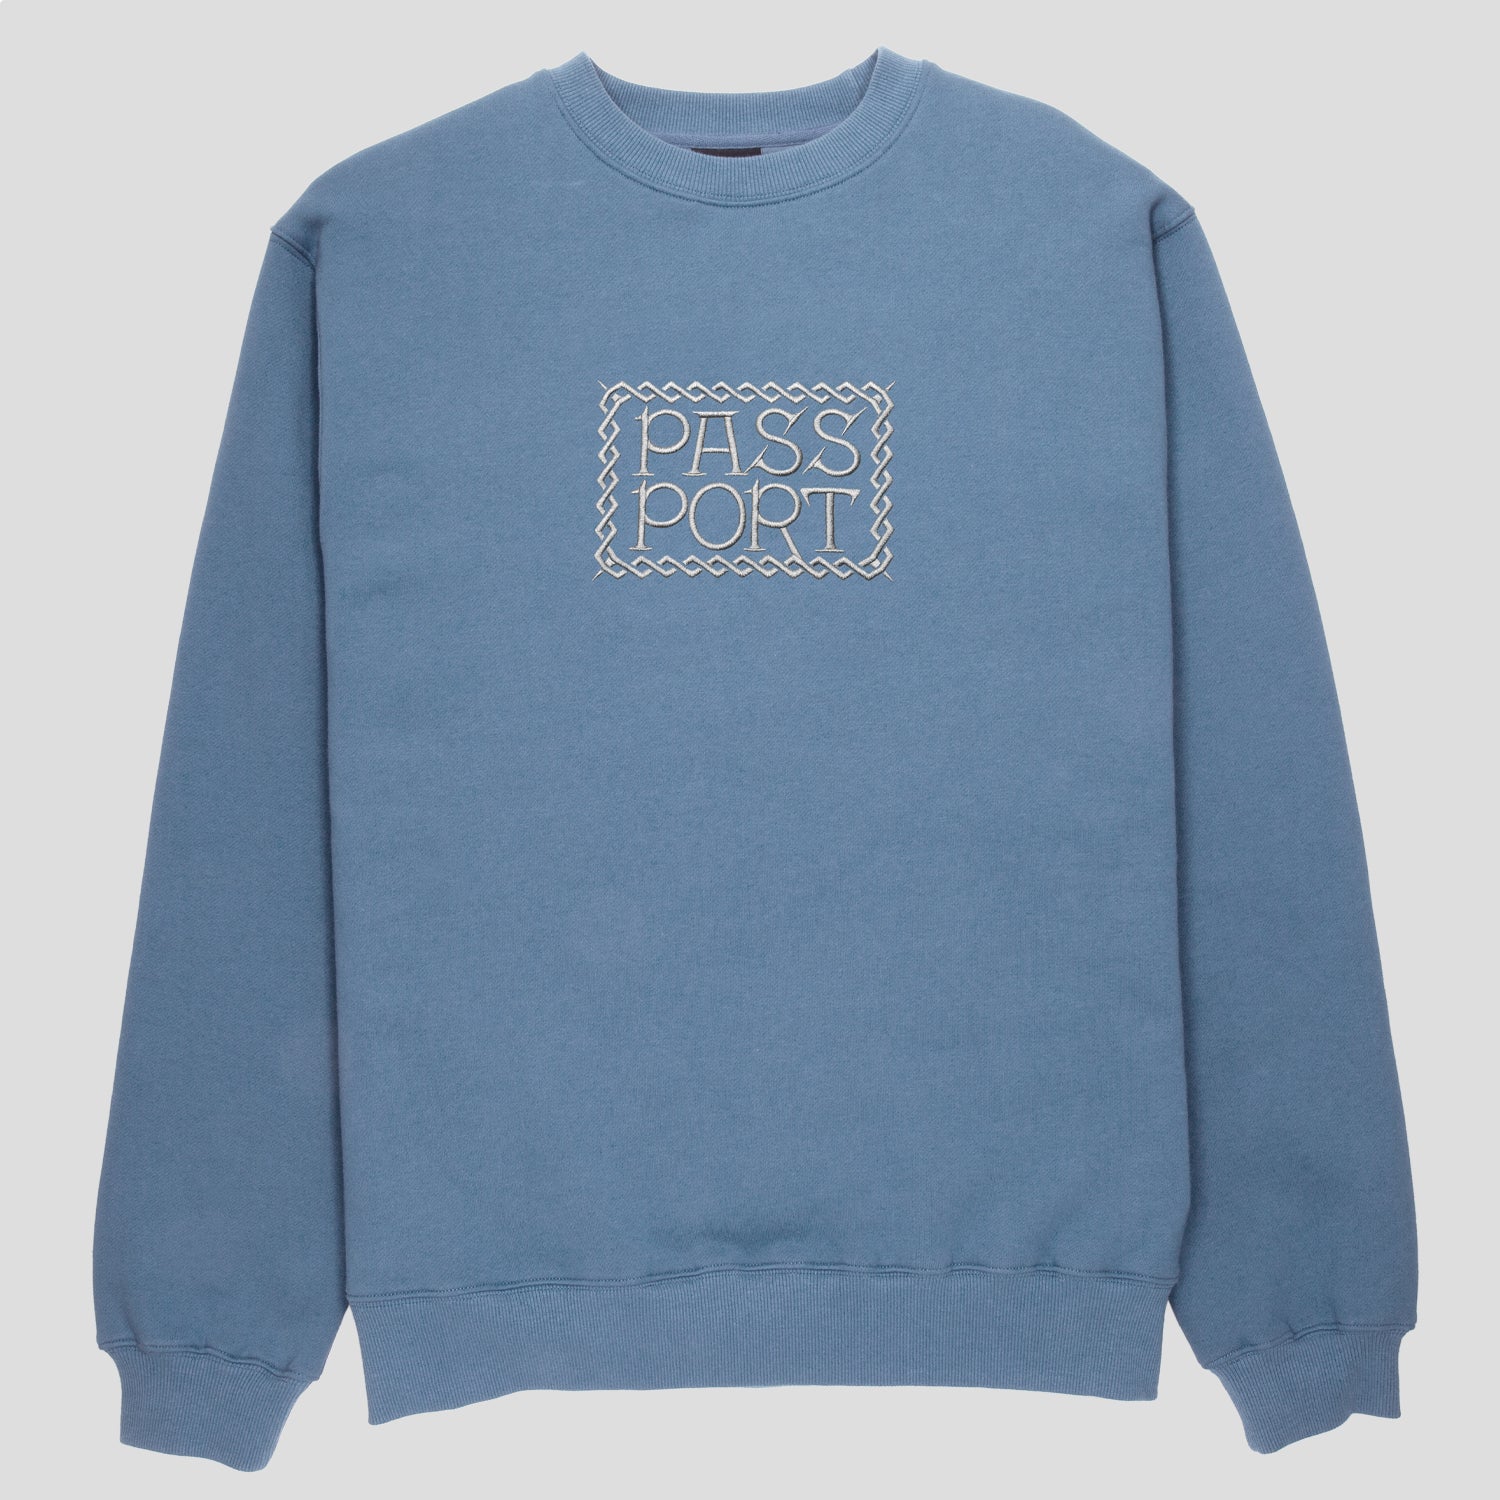 Invasive Embroidered Sweater (Washed Out Blue)